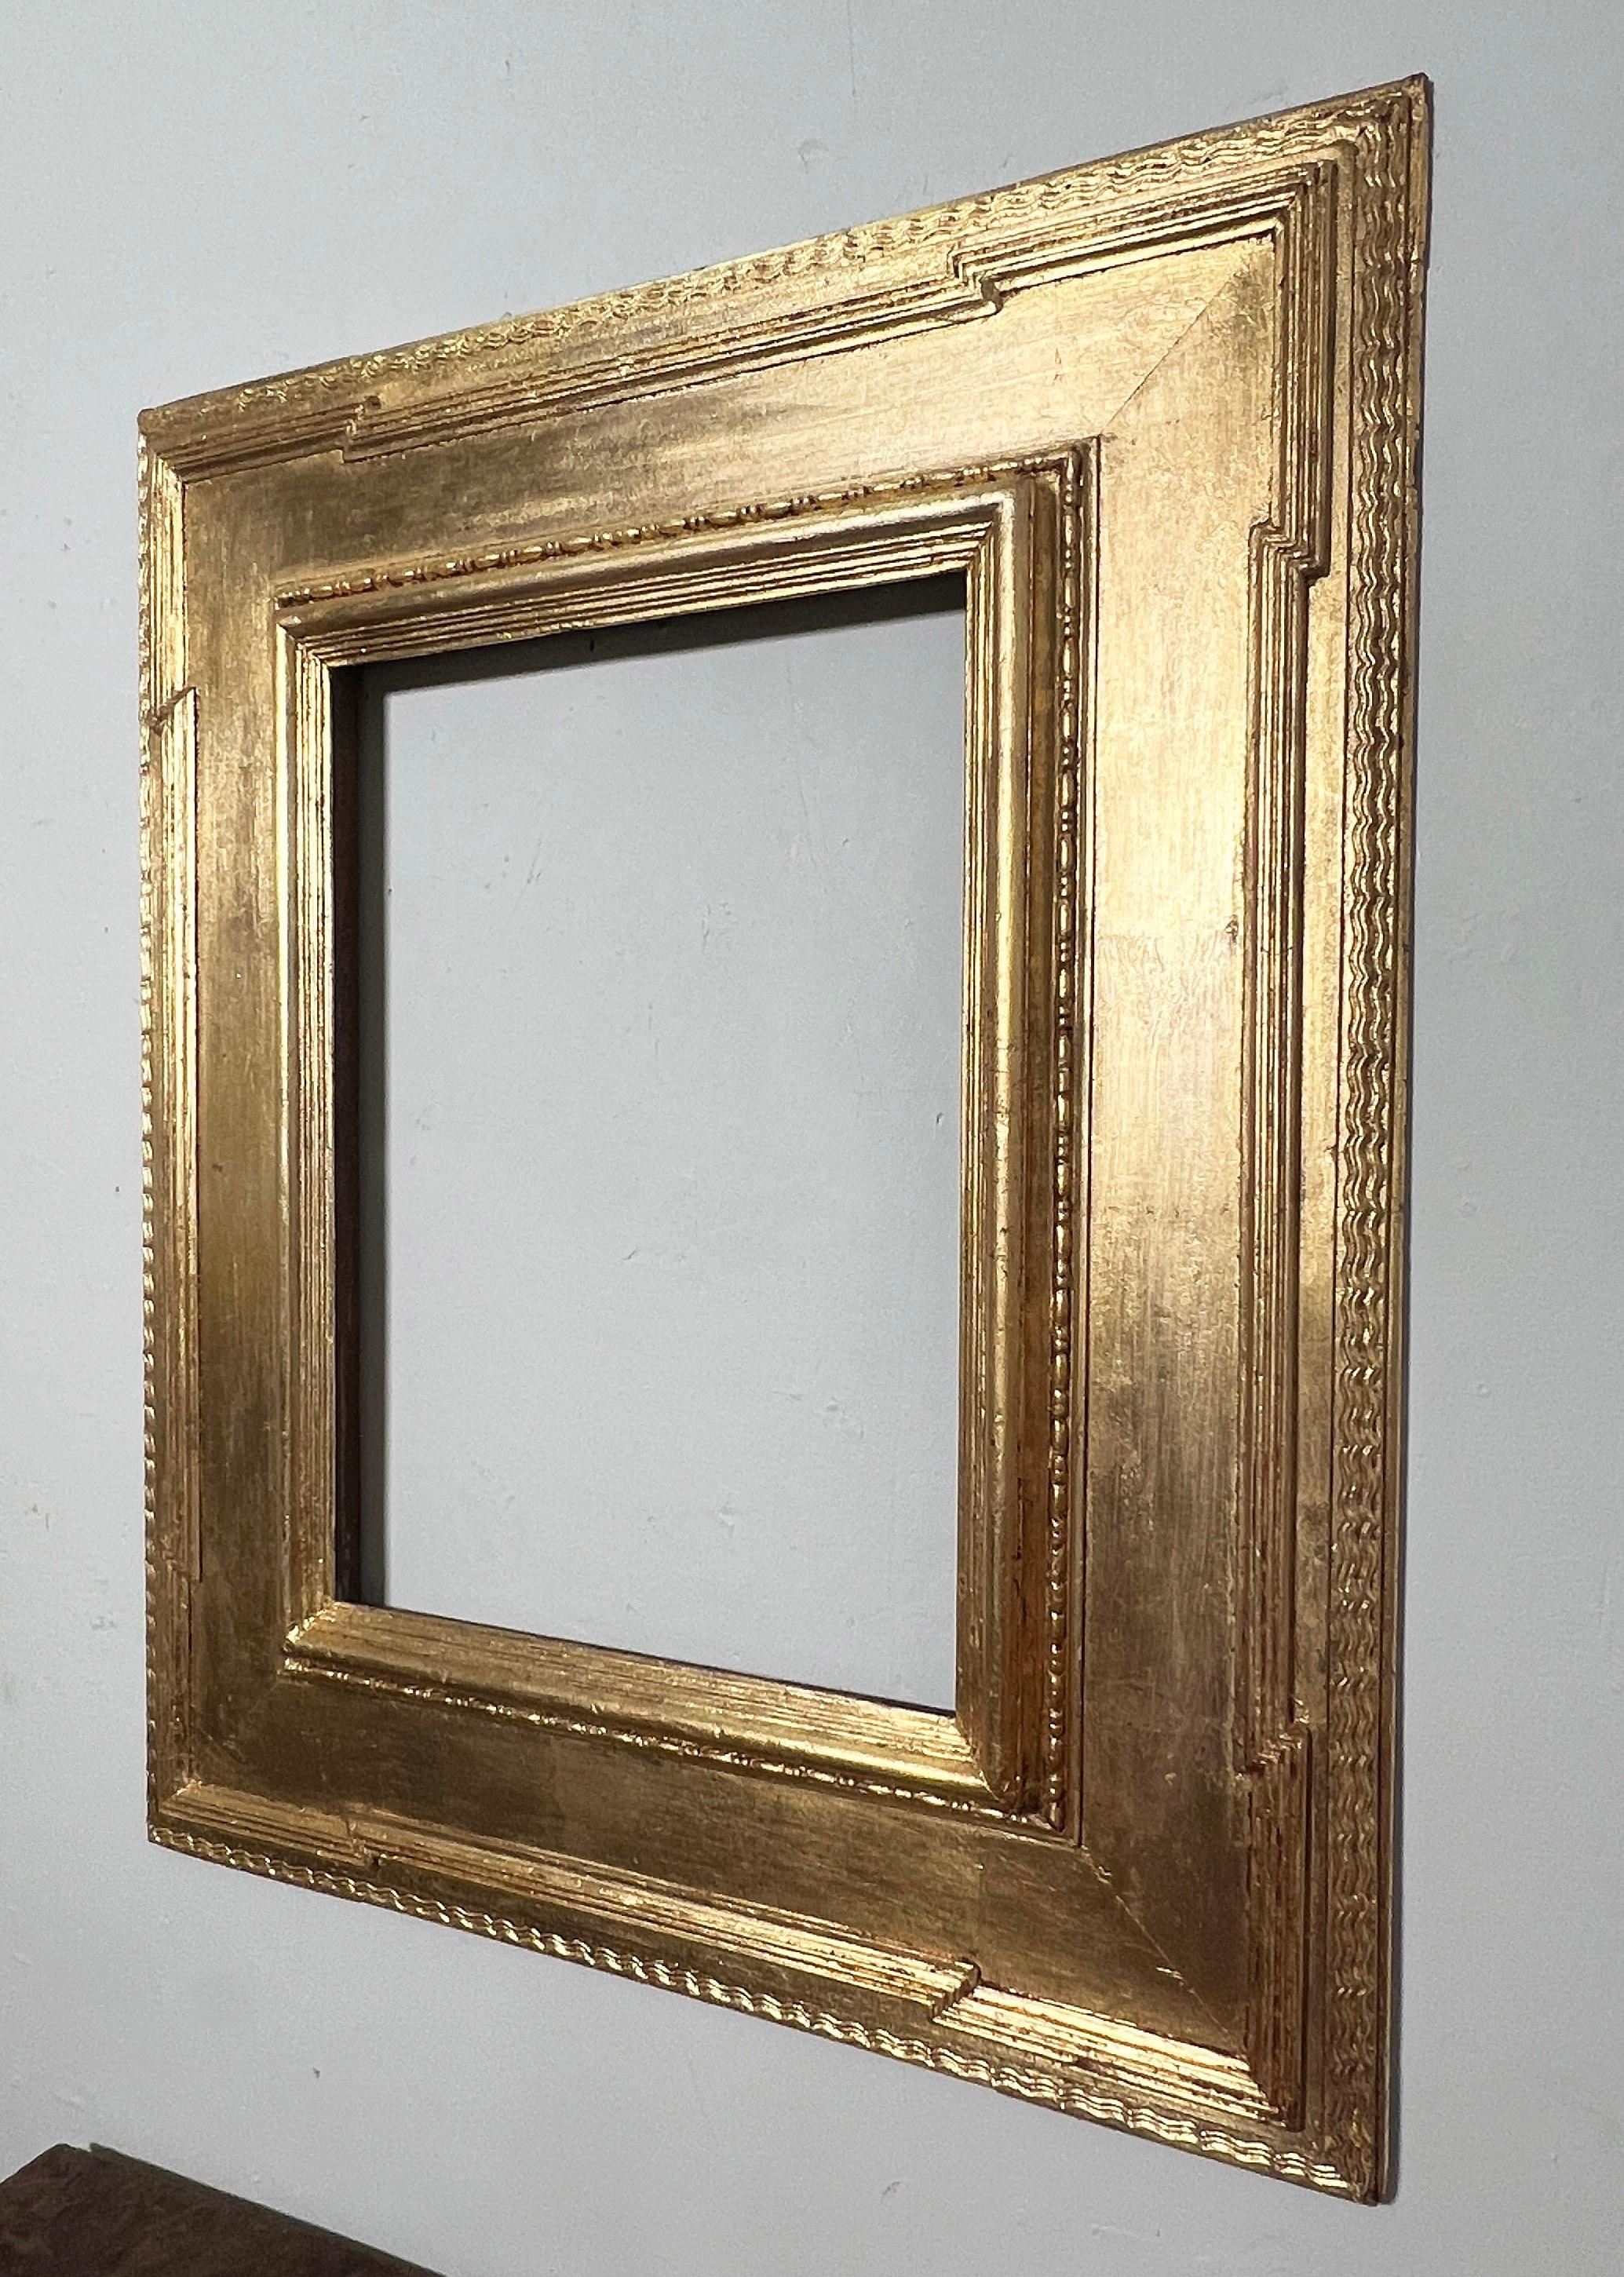 An original period frame with Flemish corners by the renowned architect Stanford White. Carved and signed by the New York firm of Thomas Jacobson and William C. Le Brocq, whom he commissioned to create his earliest designs before later employing the